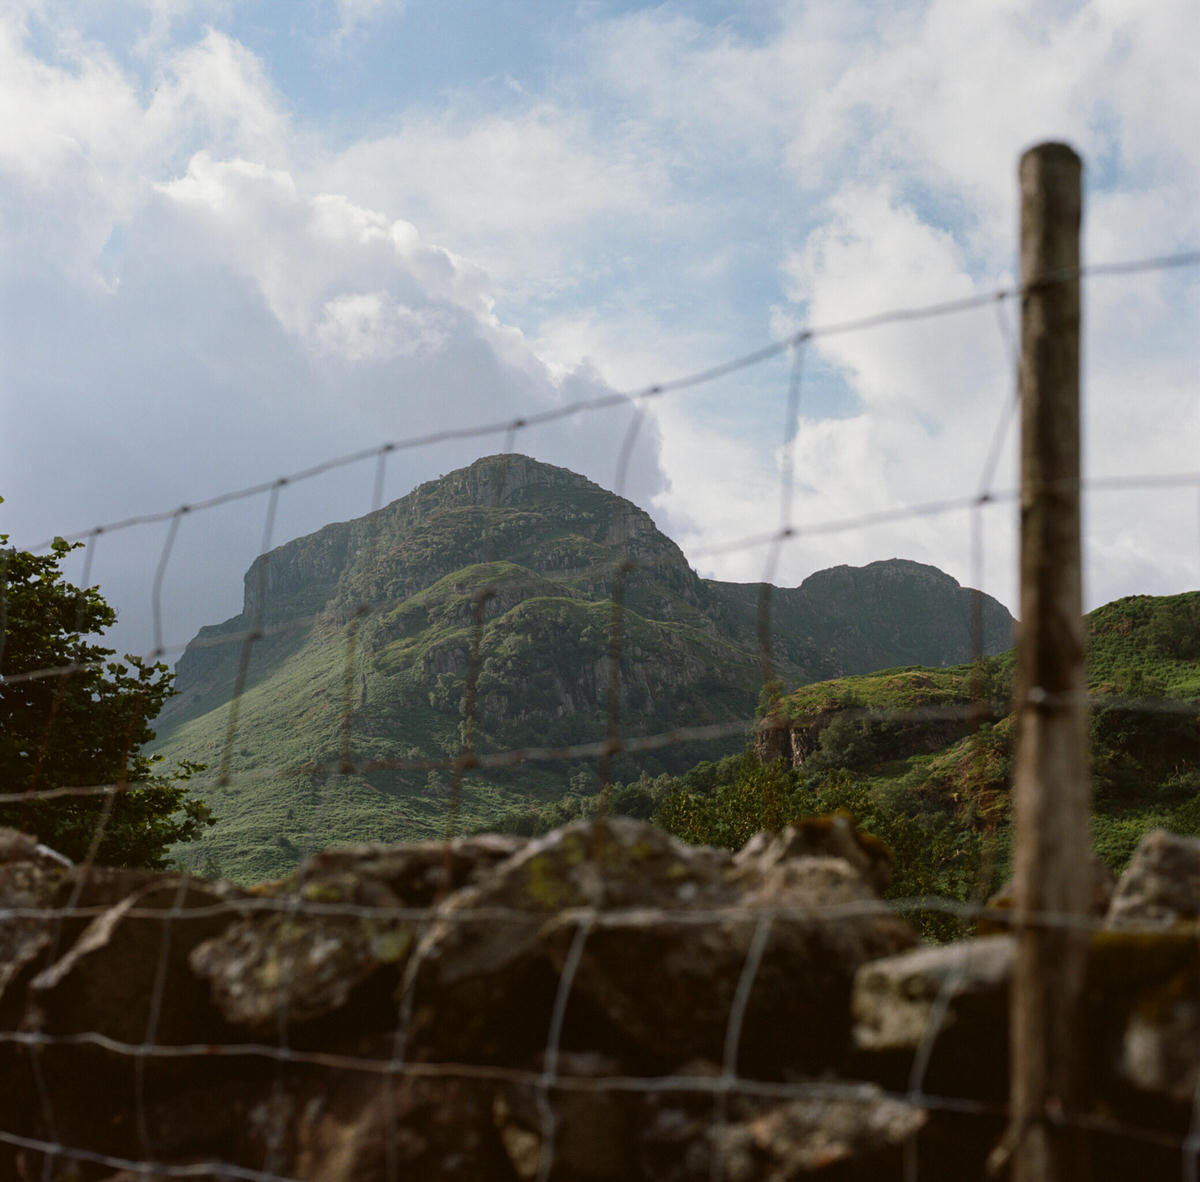 Fence and mountain